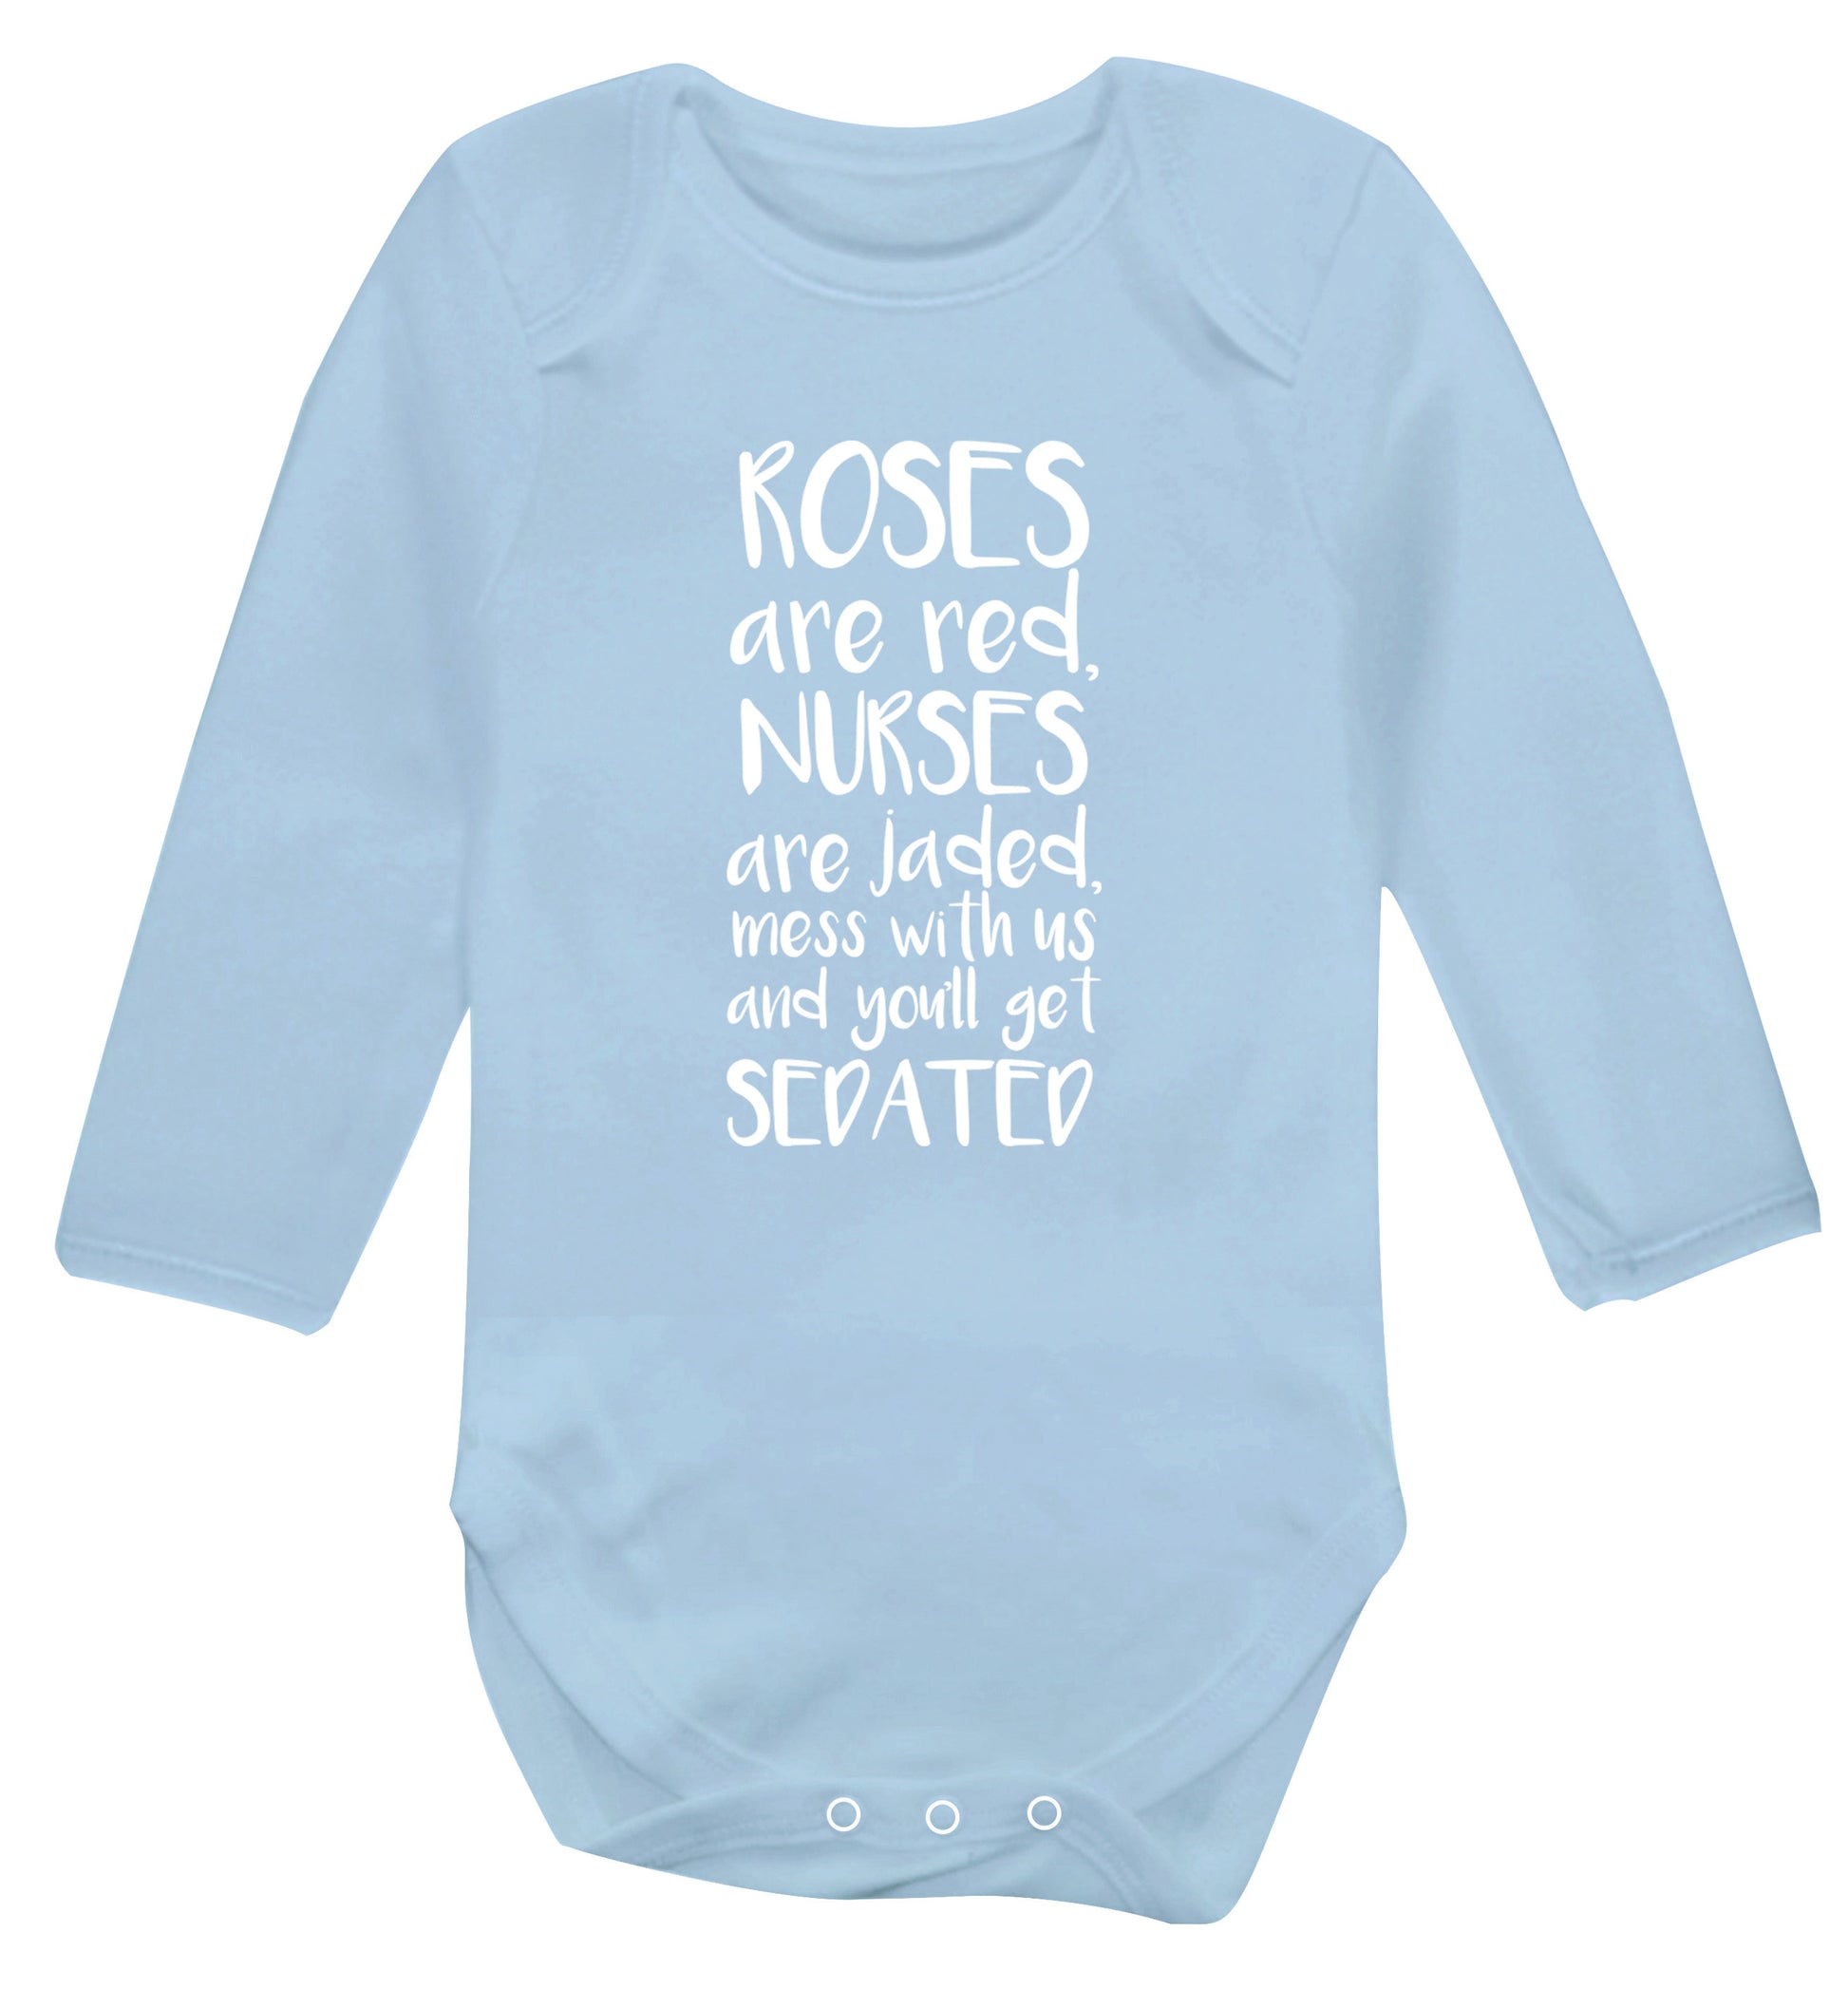 Roses are red, nurses are jaded, mess with us and you'll get sedated Baby Vest long sleeved pale blue 6-12 months